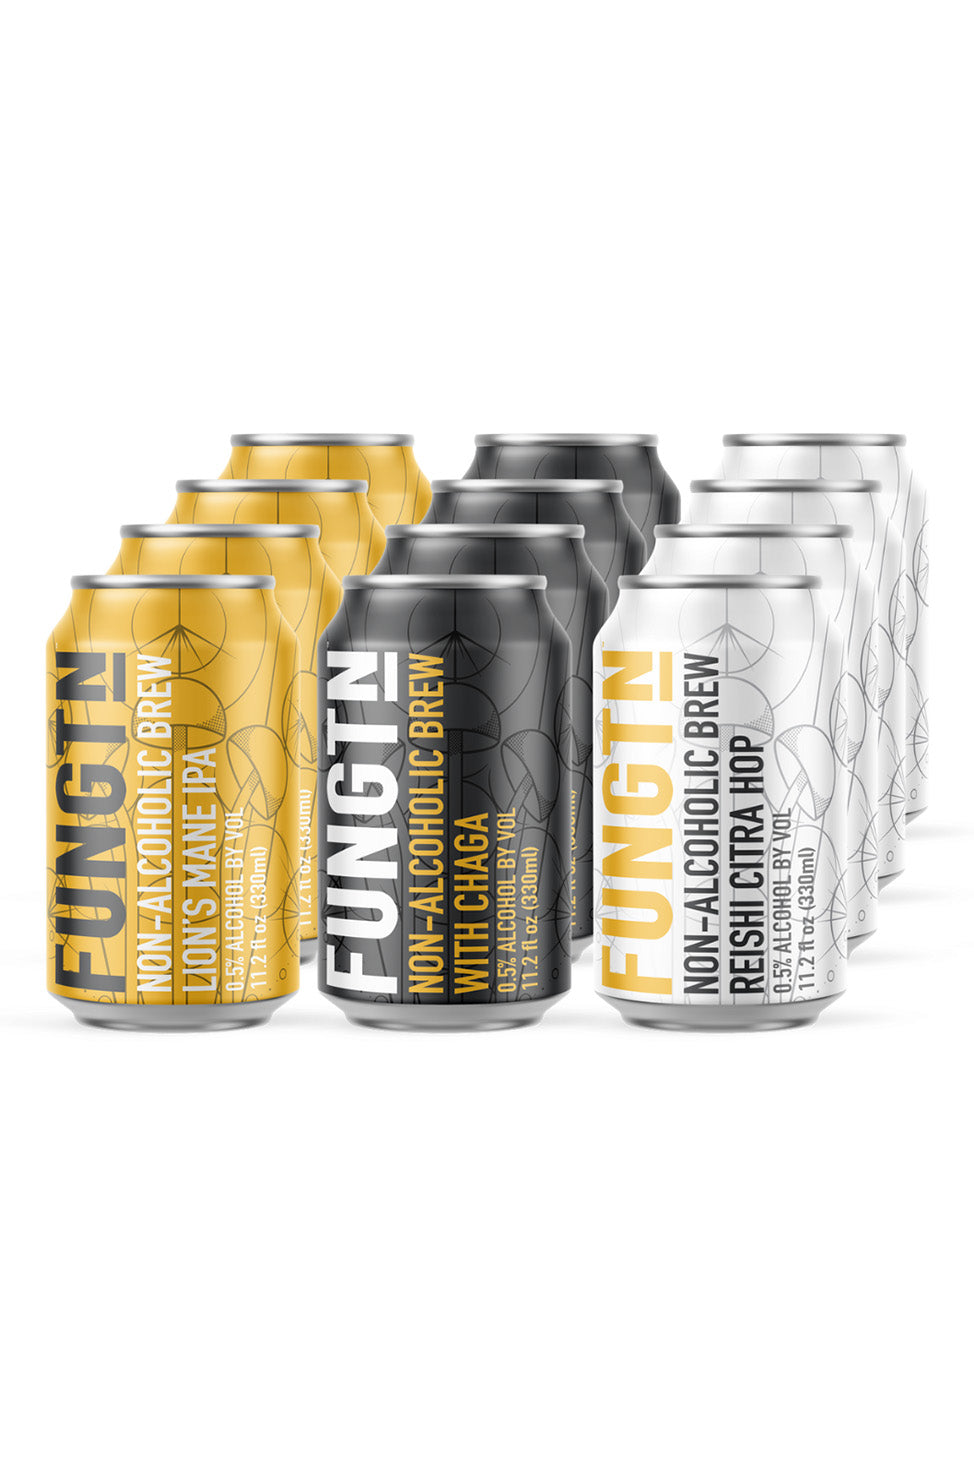 Fungtn Beer Bundle - Non Alcoholic Beer (12-Pack)